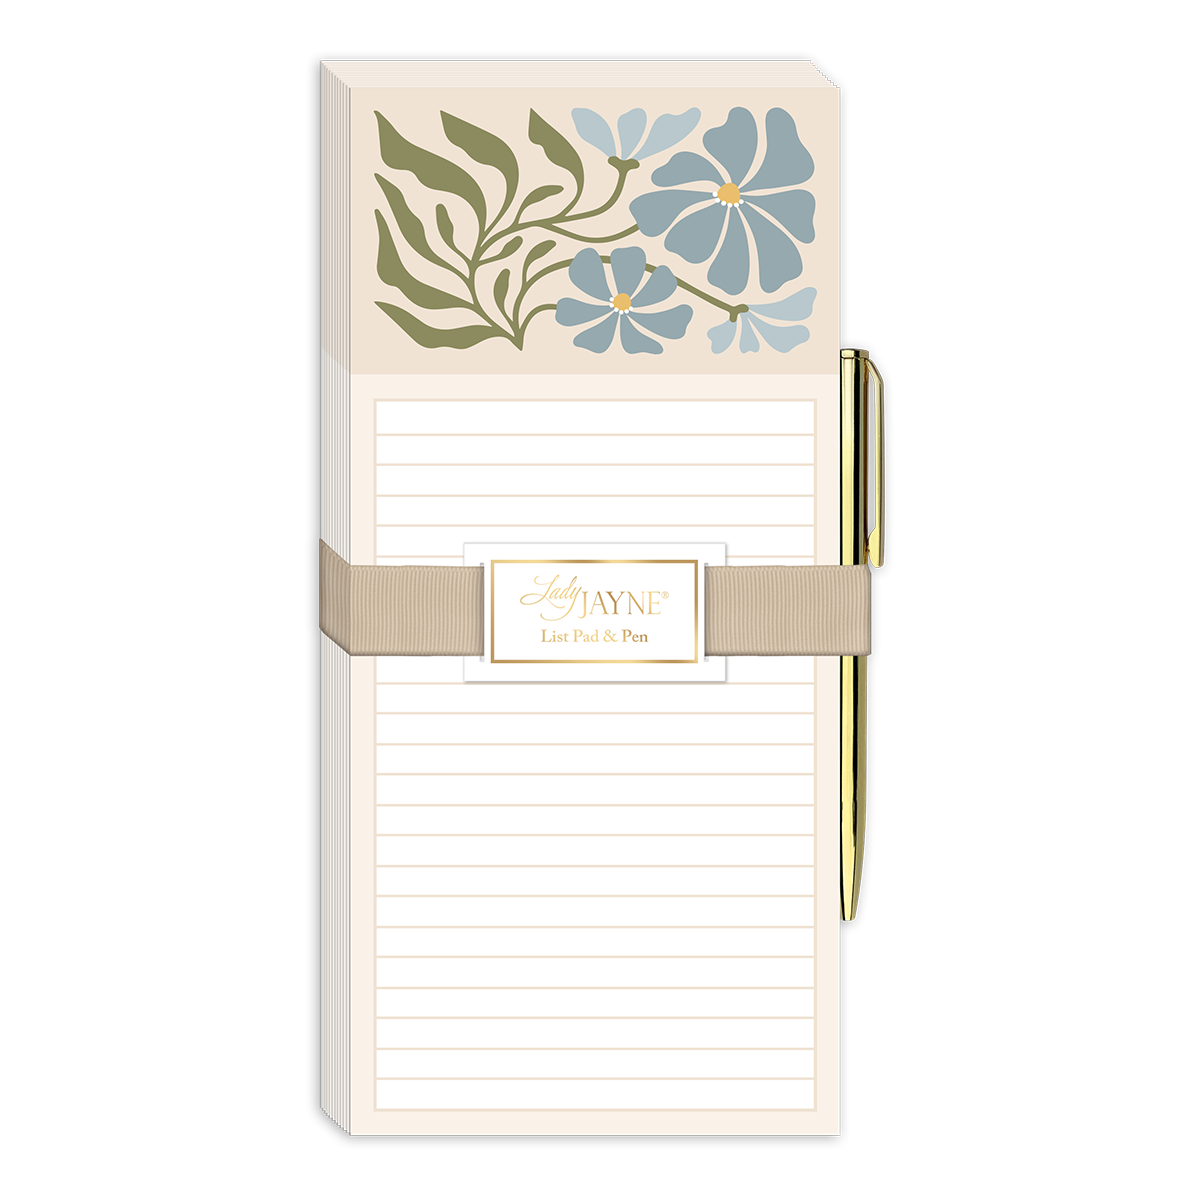 Flower Market Aster Magnetic List Pad With Pen Product